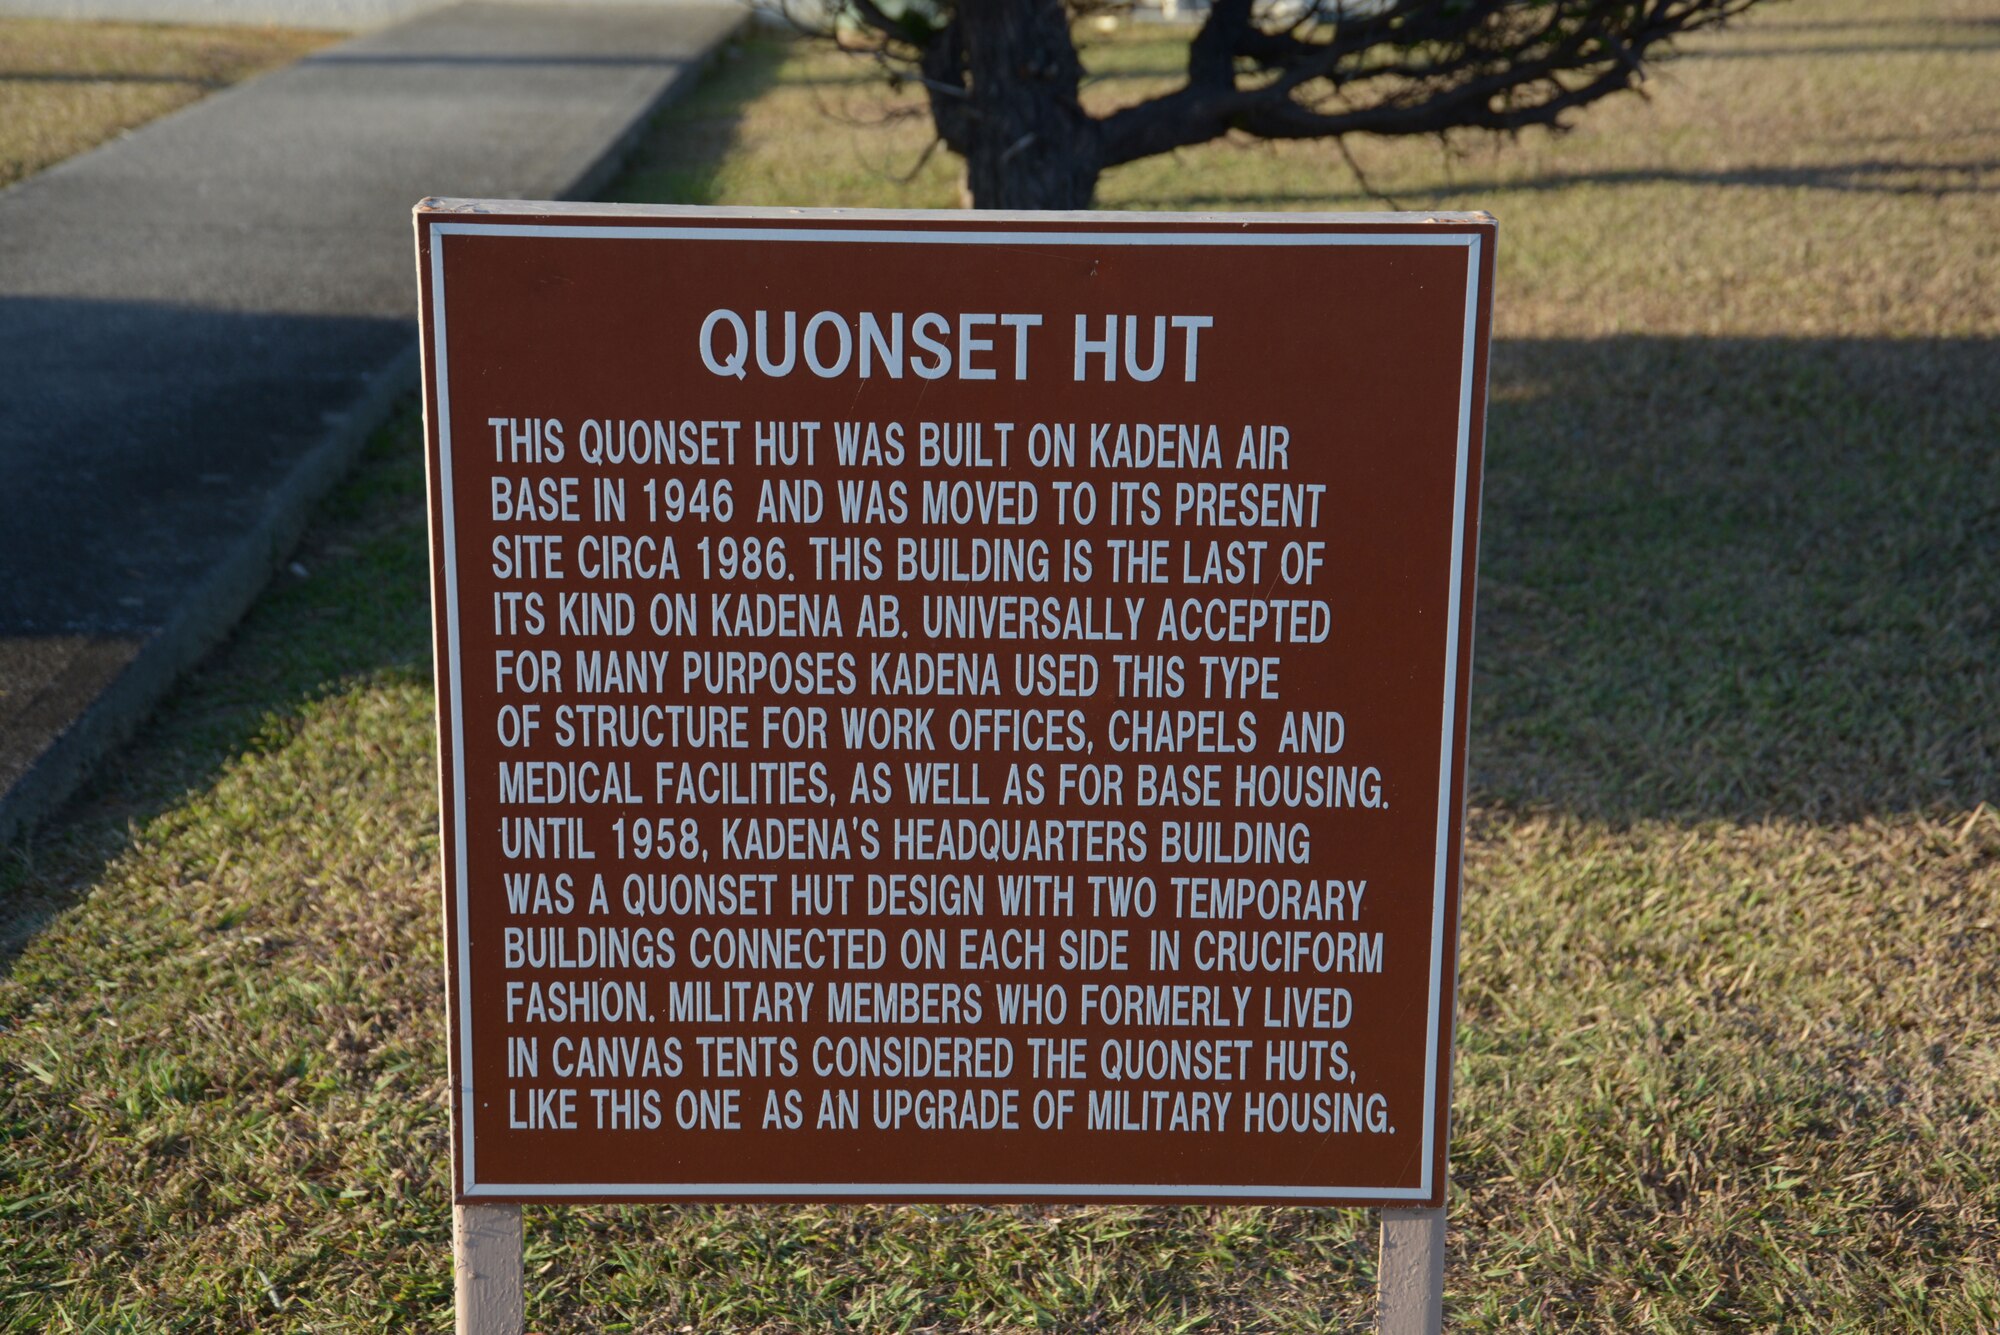 A sign rests outside the only remaining Quonset hut on Kadena Air Base, Japan. This hut was completely restored to give visitors an idea of what life was like during the days of Quonset hut use. (U.S. Air Force photo by Tech. Sgt. Jocelyn Rich-Pendracki/Released)